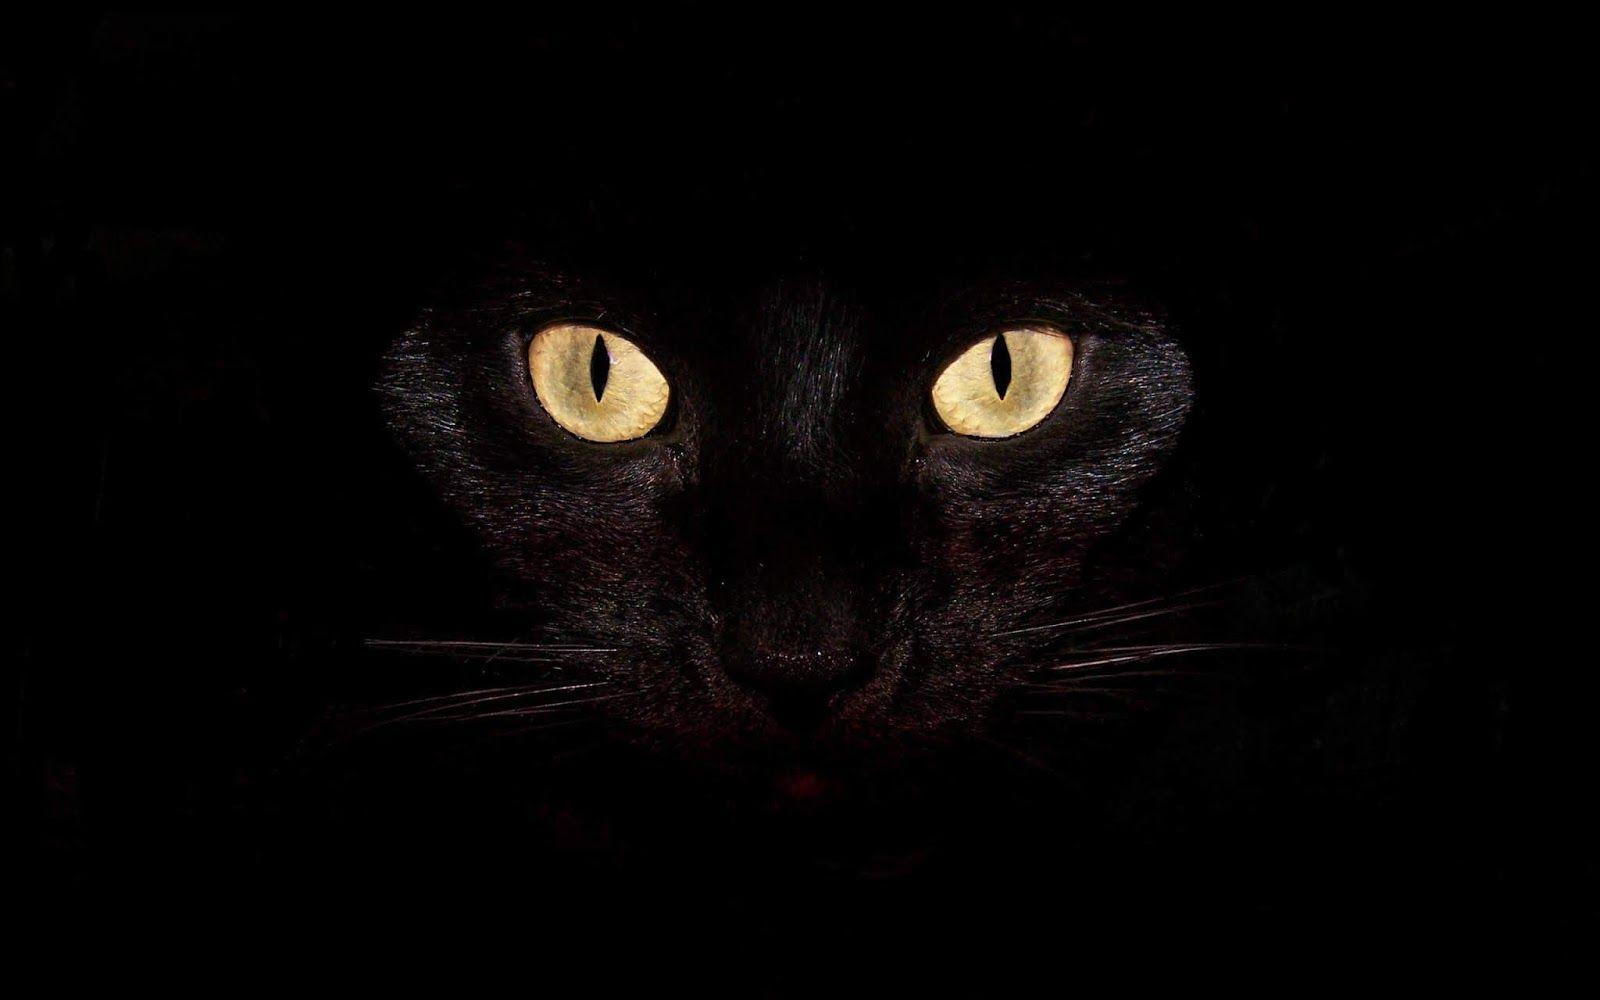 Dark Cat Wallpaper High Quality Desktop, iphone and android